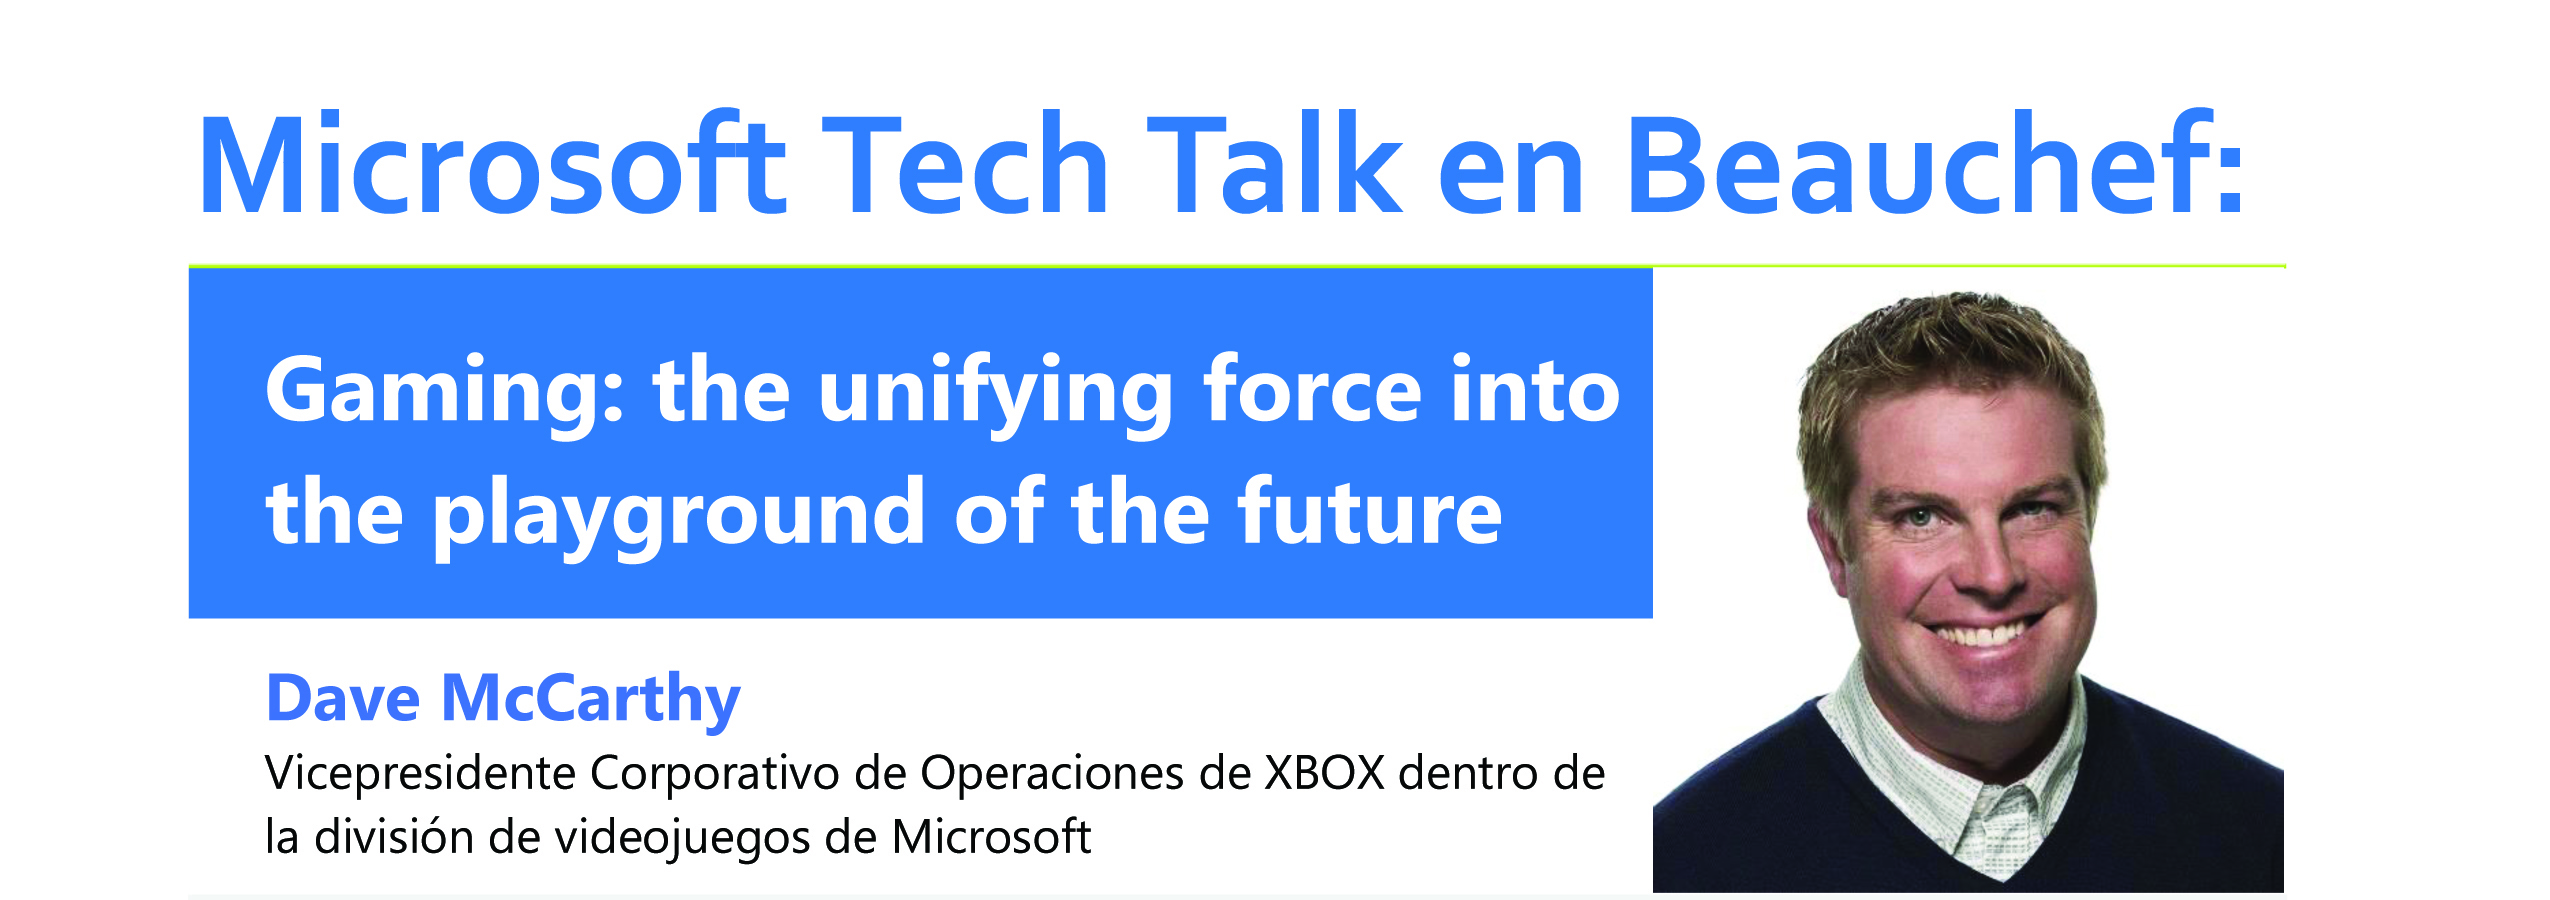 Microsoft Tech Talk en Beauchef: “Gaming: the unifying force into the playground of the future” / 03 de abril - 14:30 hrs. - Auditorio Gorbea FCFM